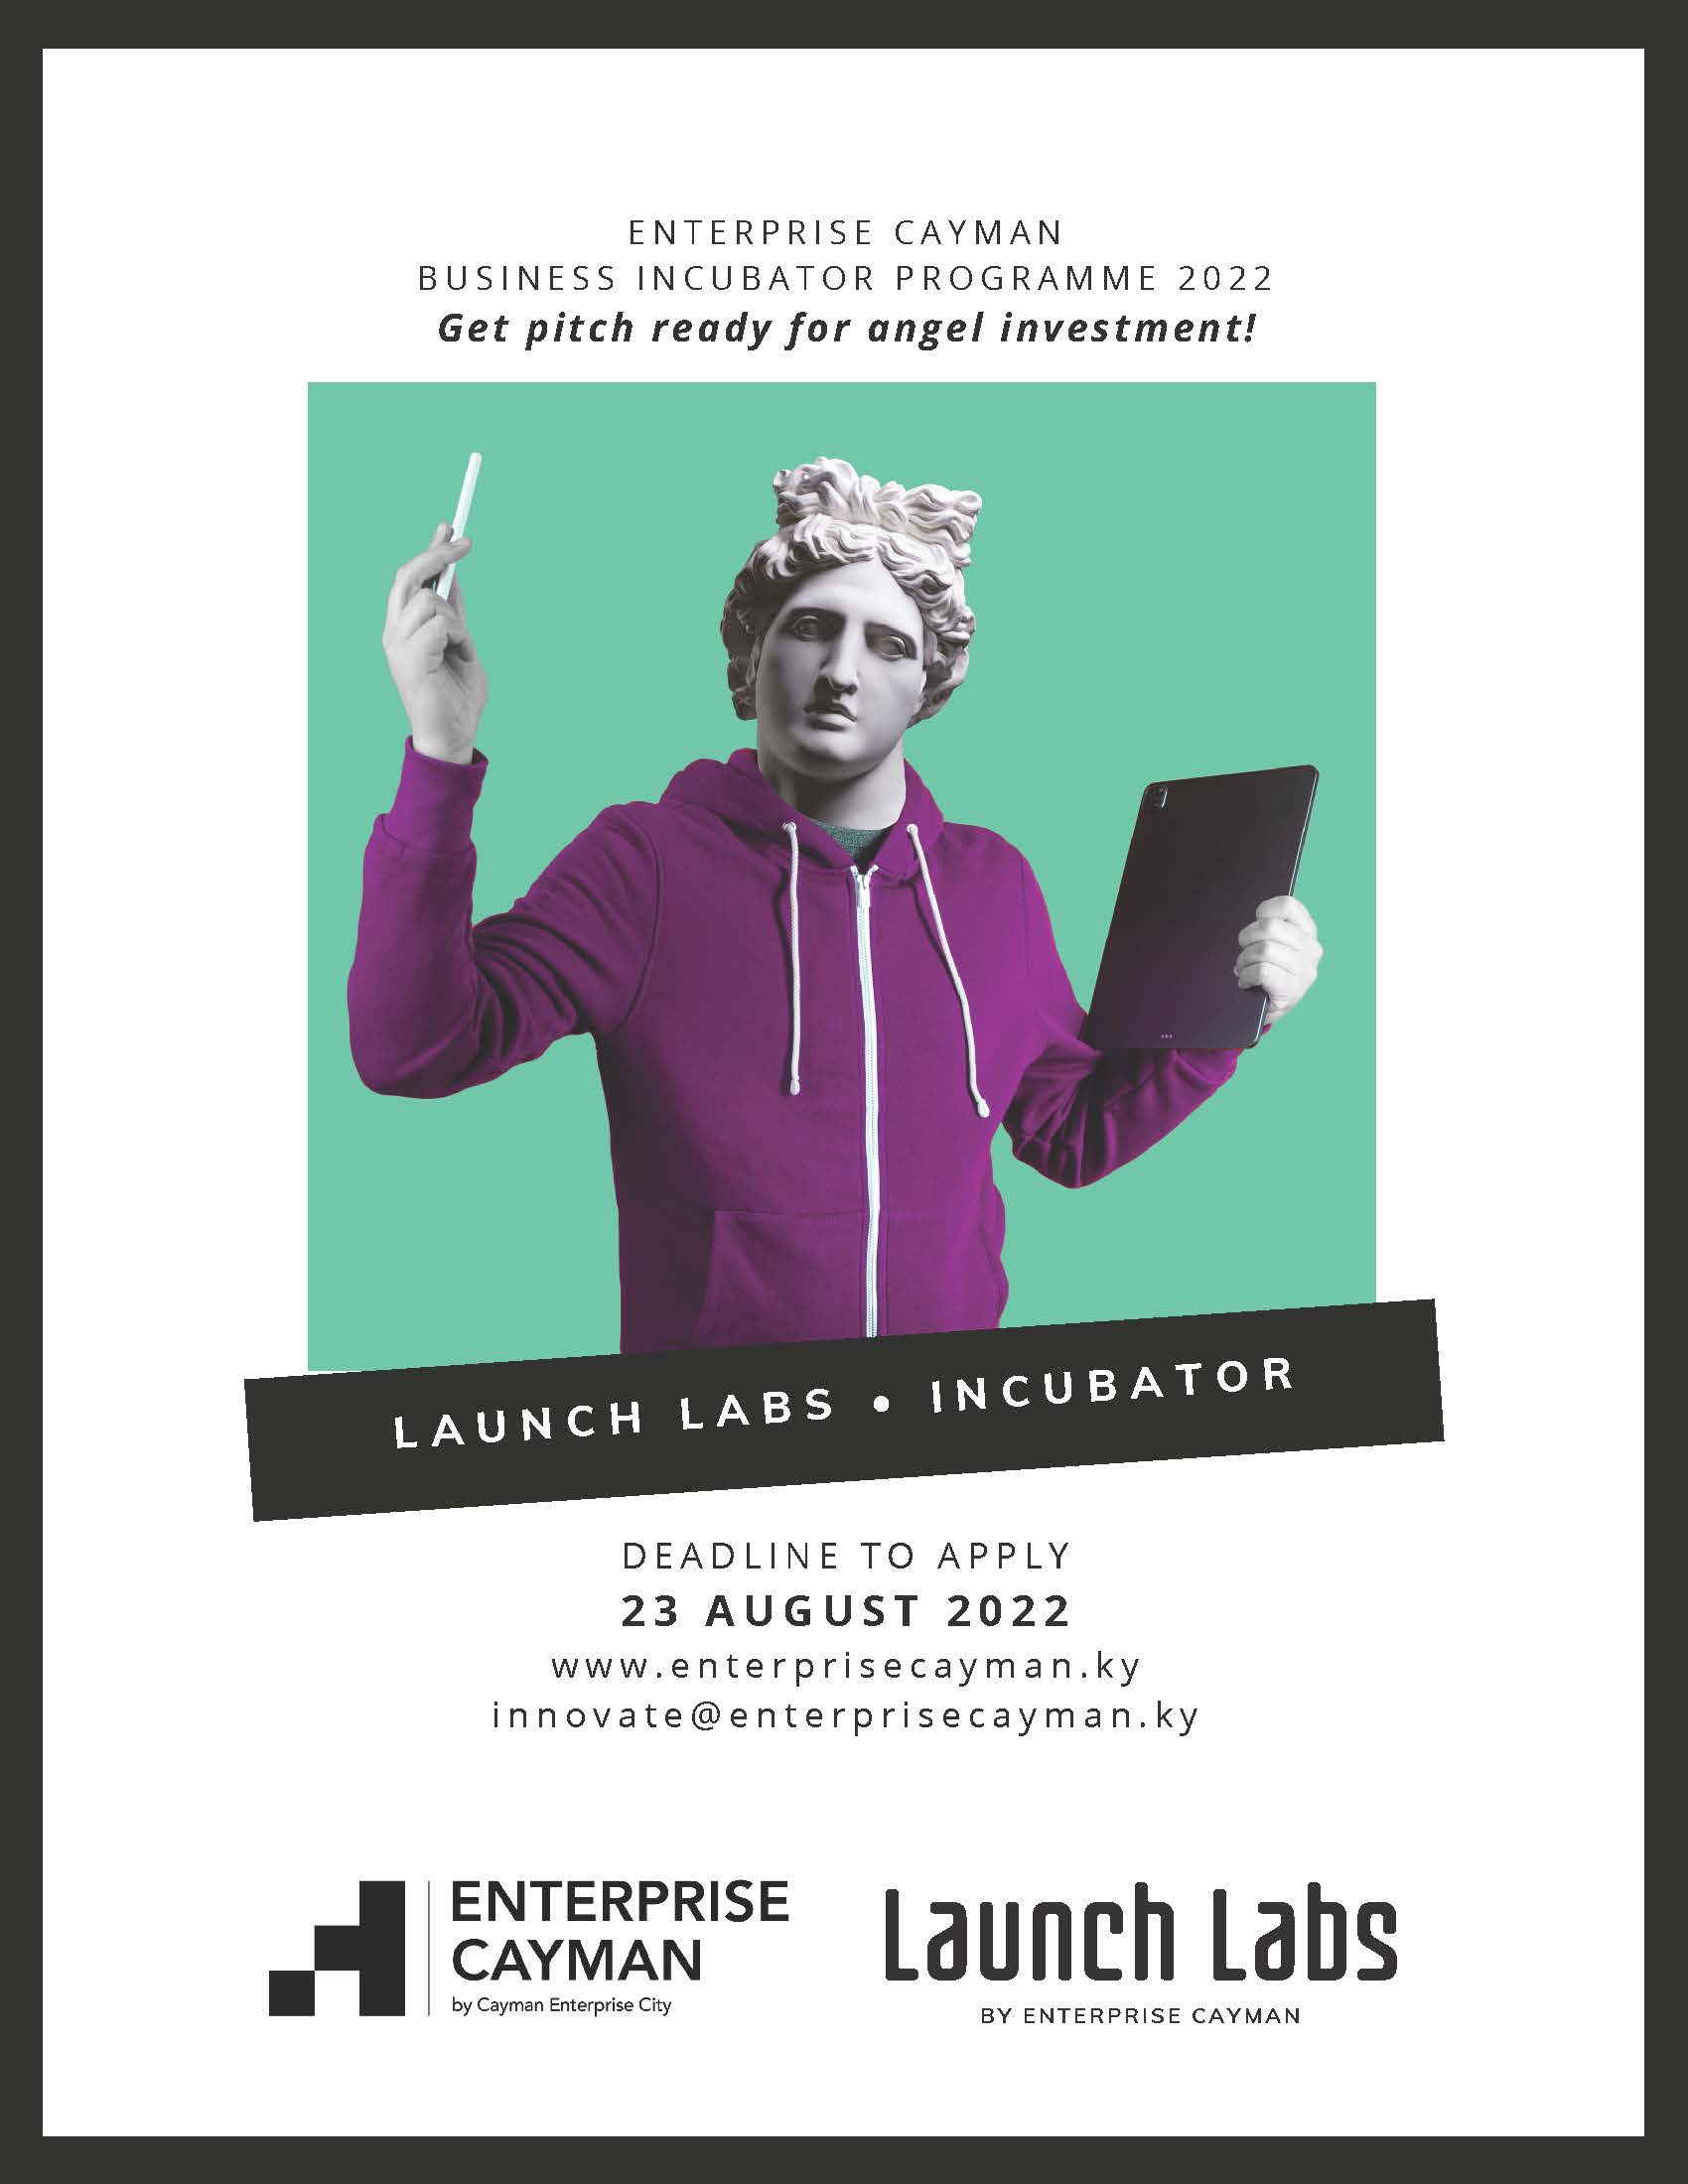 launch-labs-incubator-poster-8-5x11-7492265